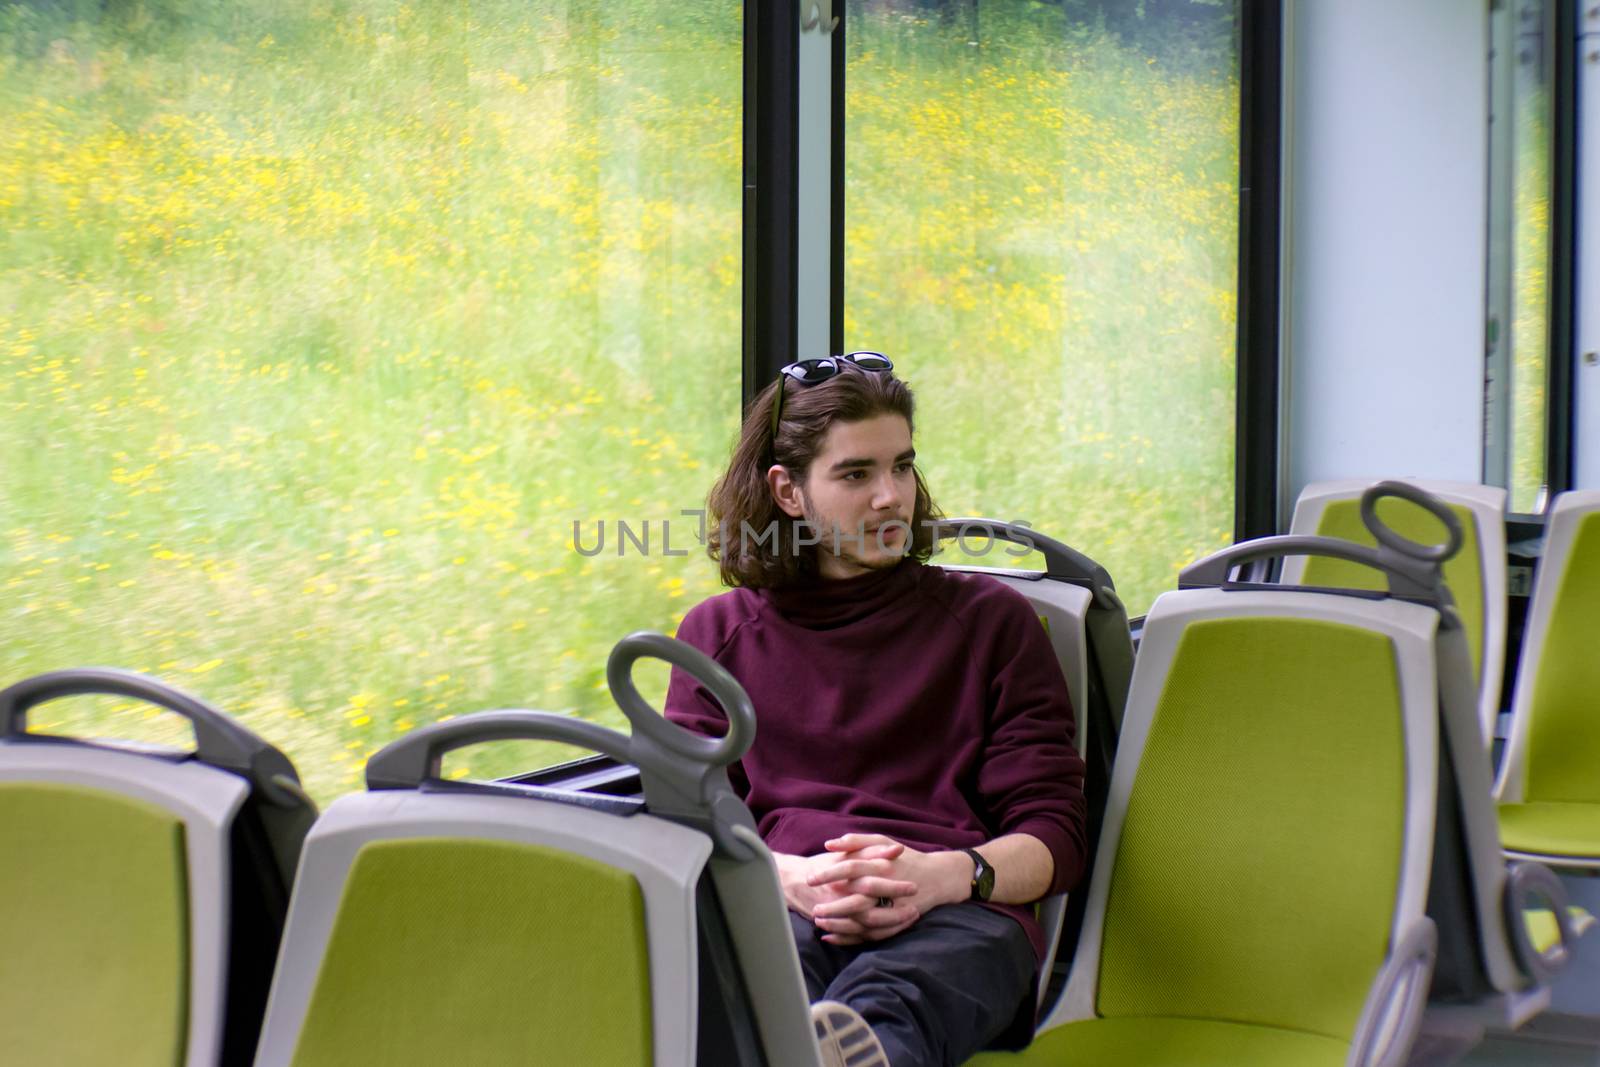 A handsome guy rides a suburban train, sits and looks out the window, outside the window is a blooming spring meadow.